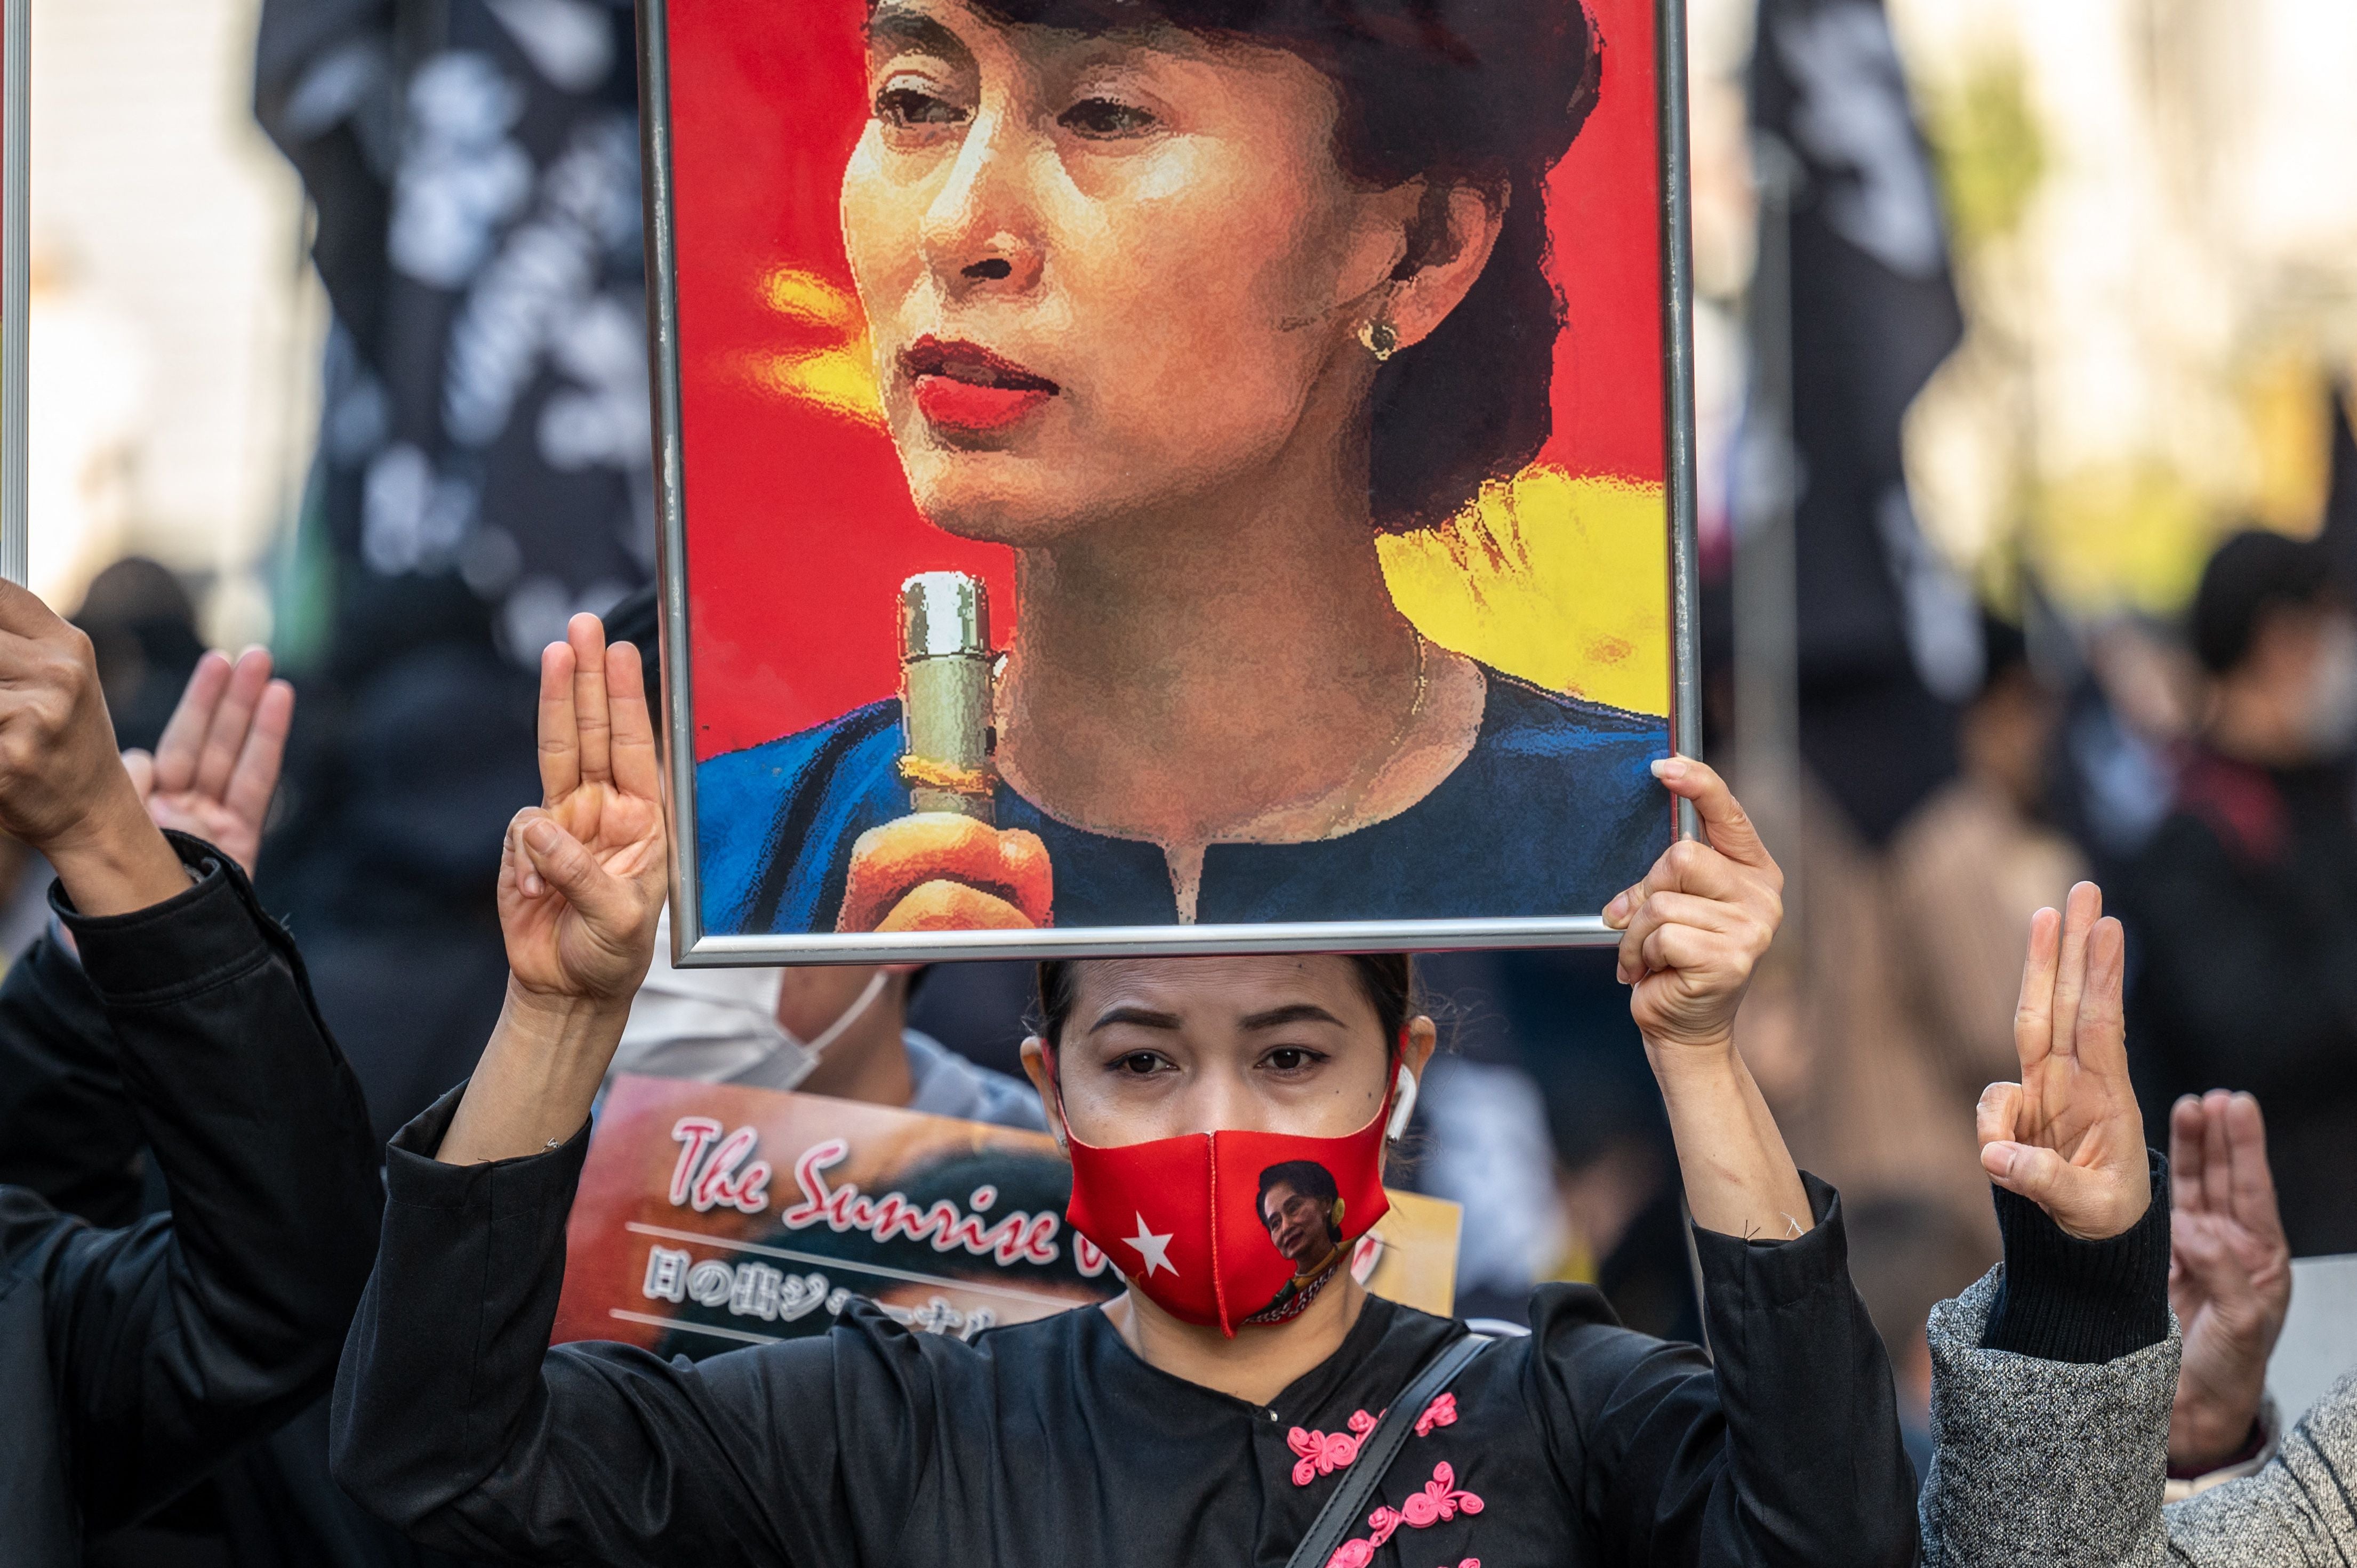 The people of Myanmar are determined to change the course of history and fight for democracy